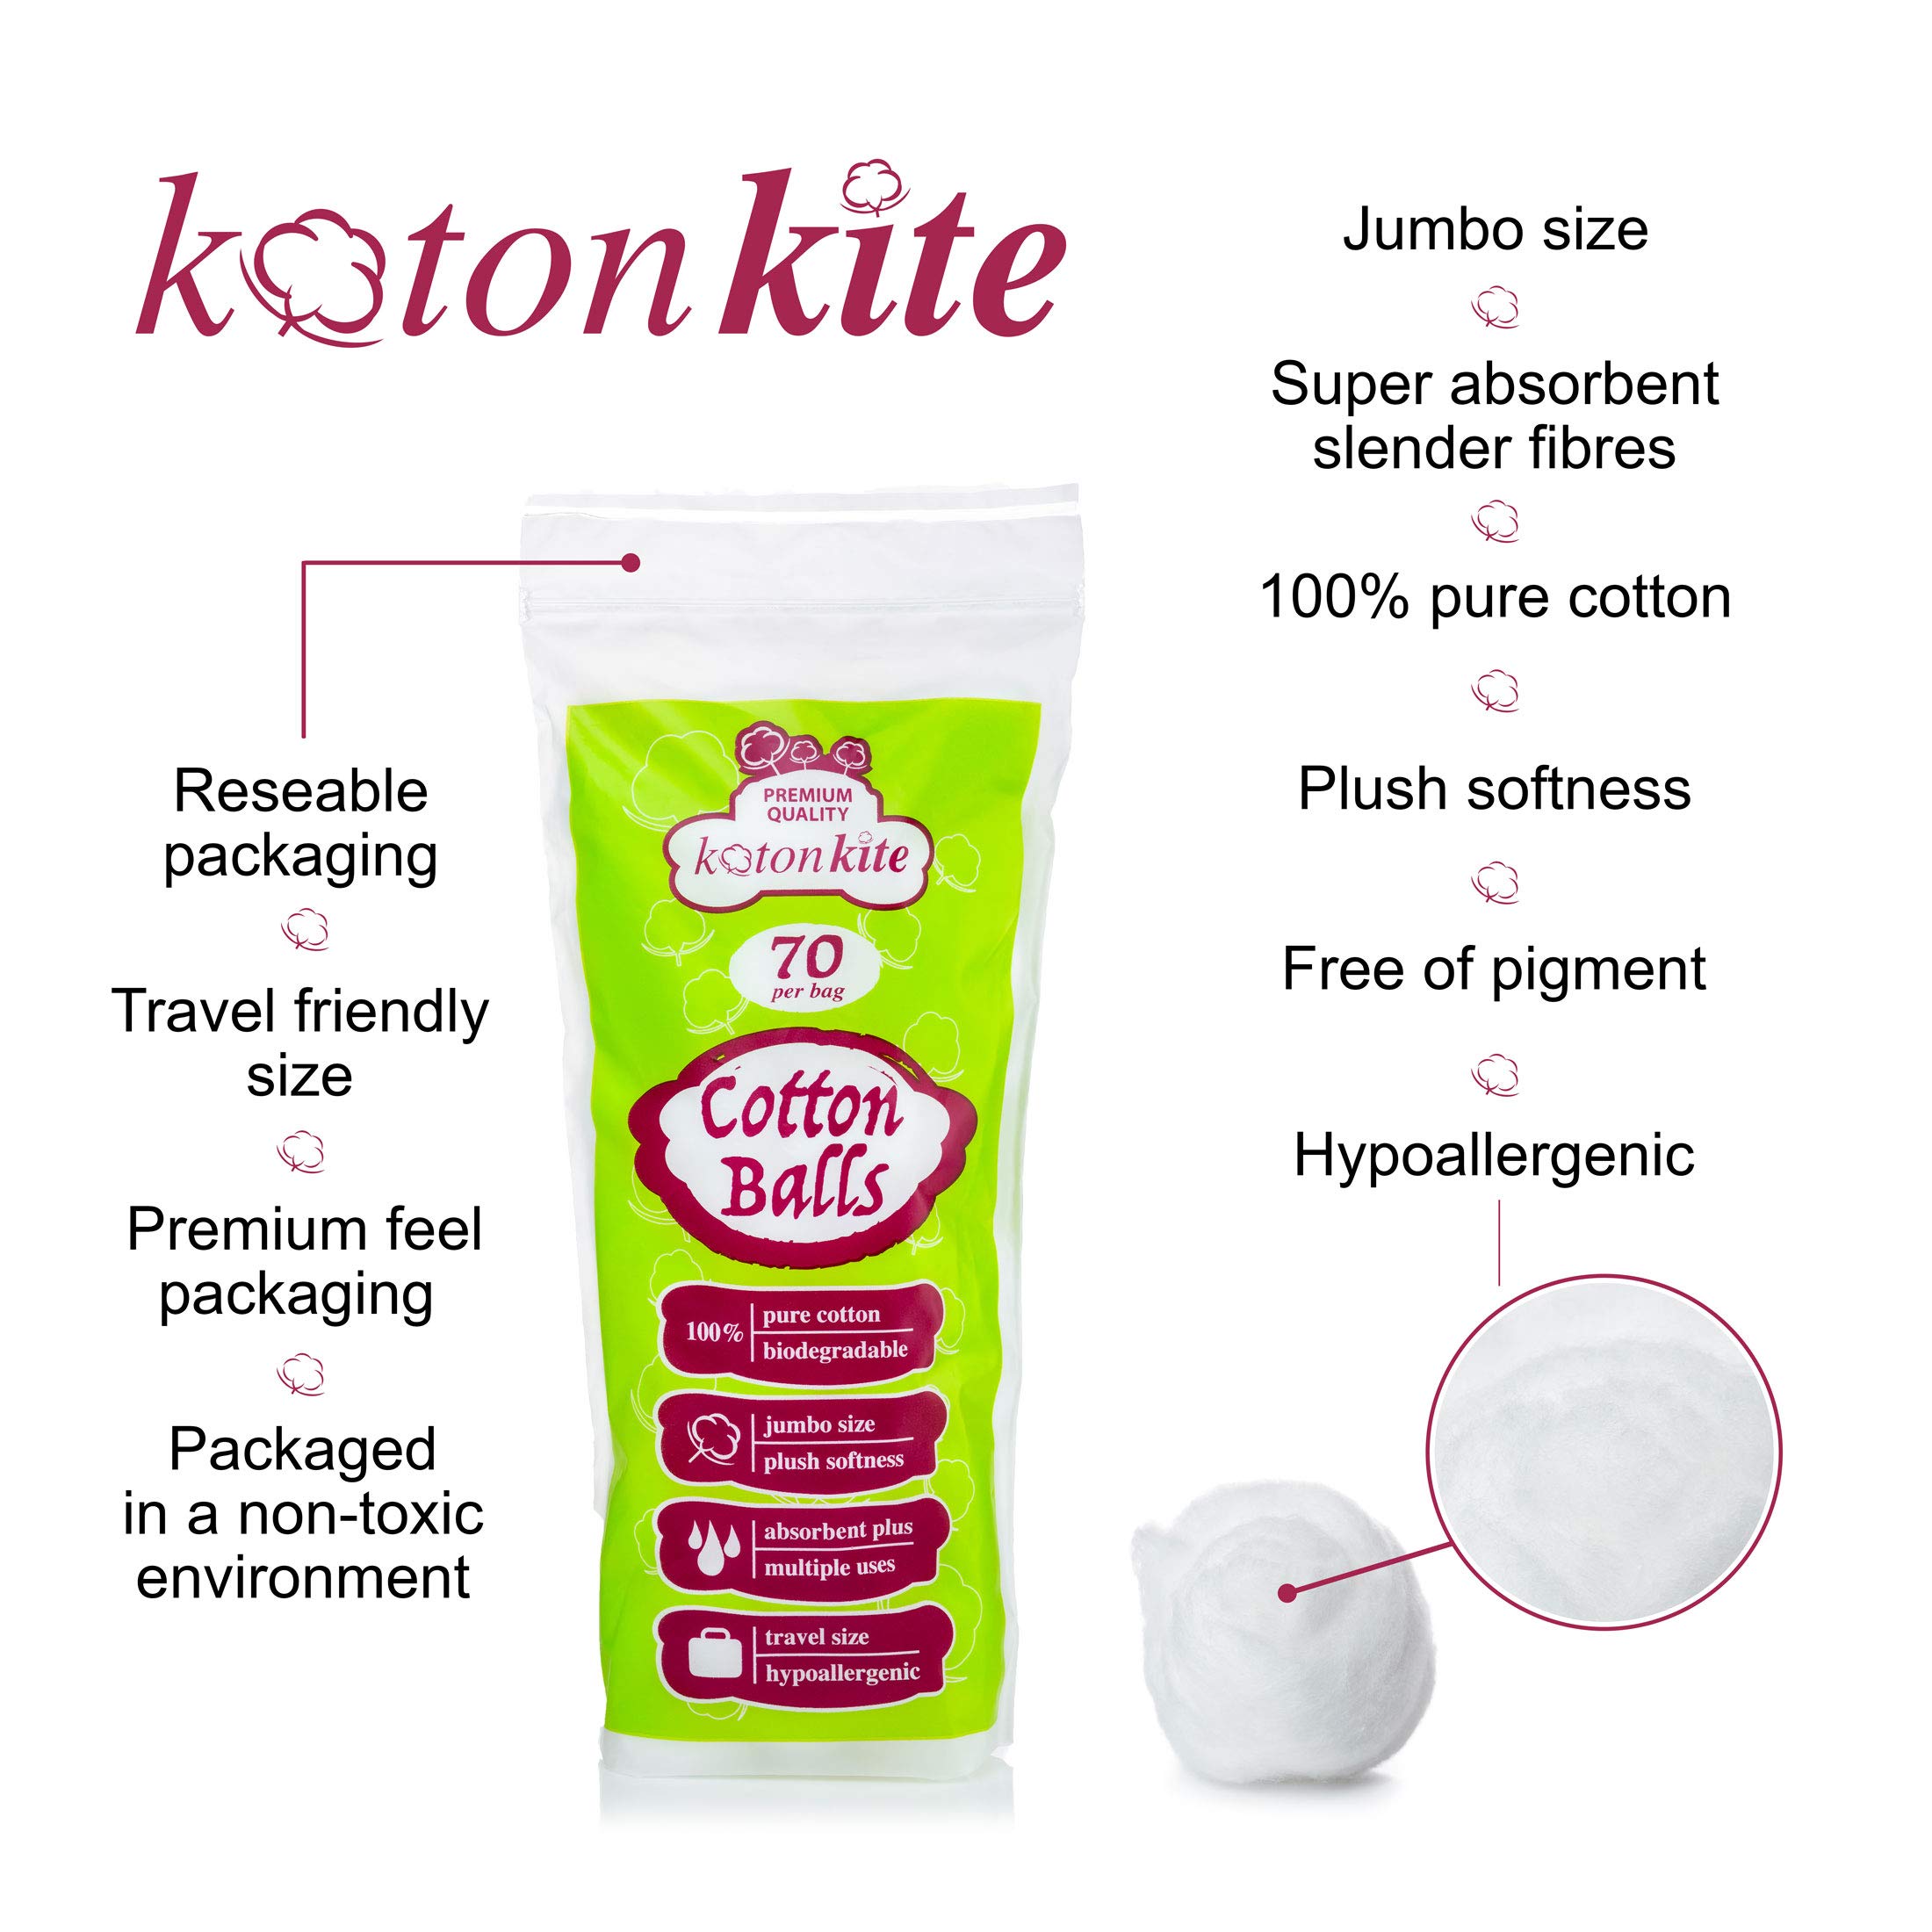 Jumbo Cotton Balls - 210 ct (3 Packs of 70) - Premium Quality, 100% Biodegradable, Super Soft & Absorbent. Use for Nail Polish & face Make-up Removal, Skincare, Medical use, Baby Care, Arts & Crafts